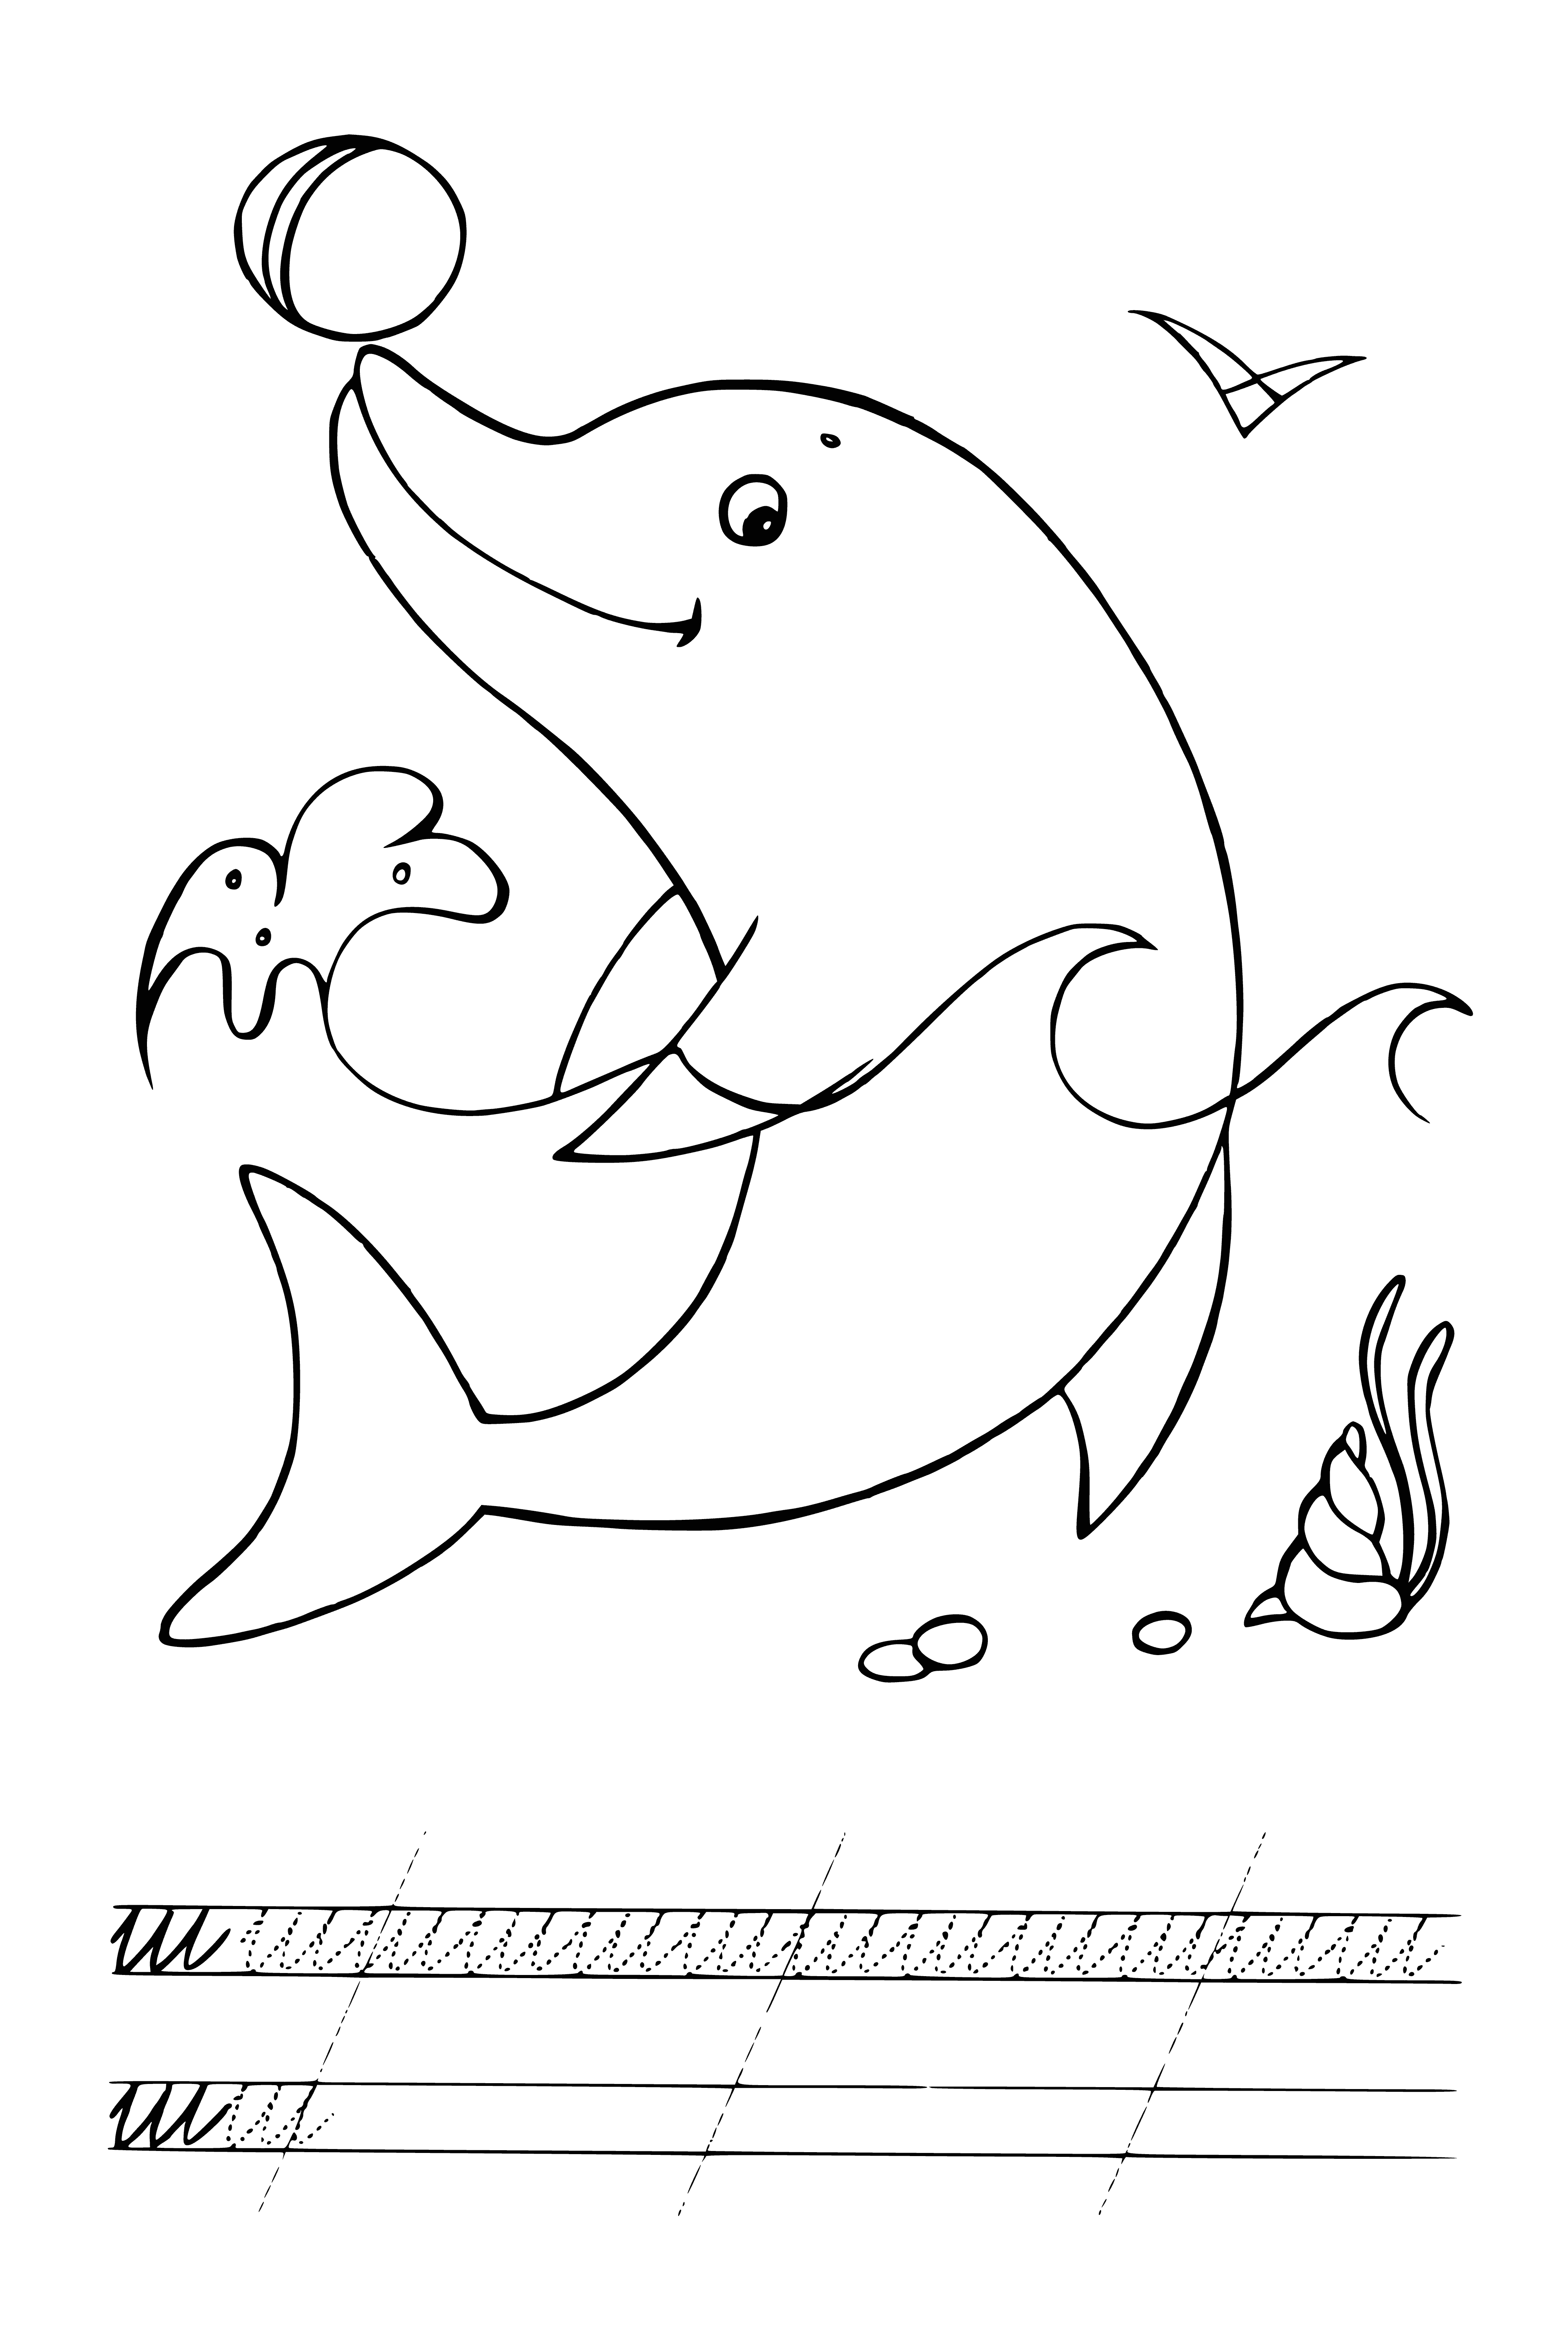 Dolphin coloring page